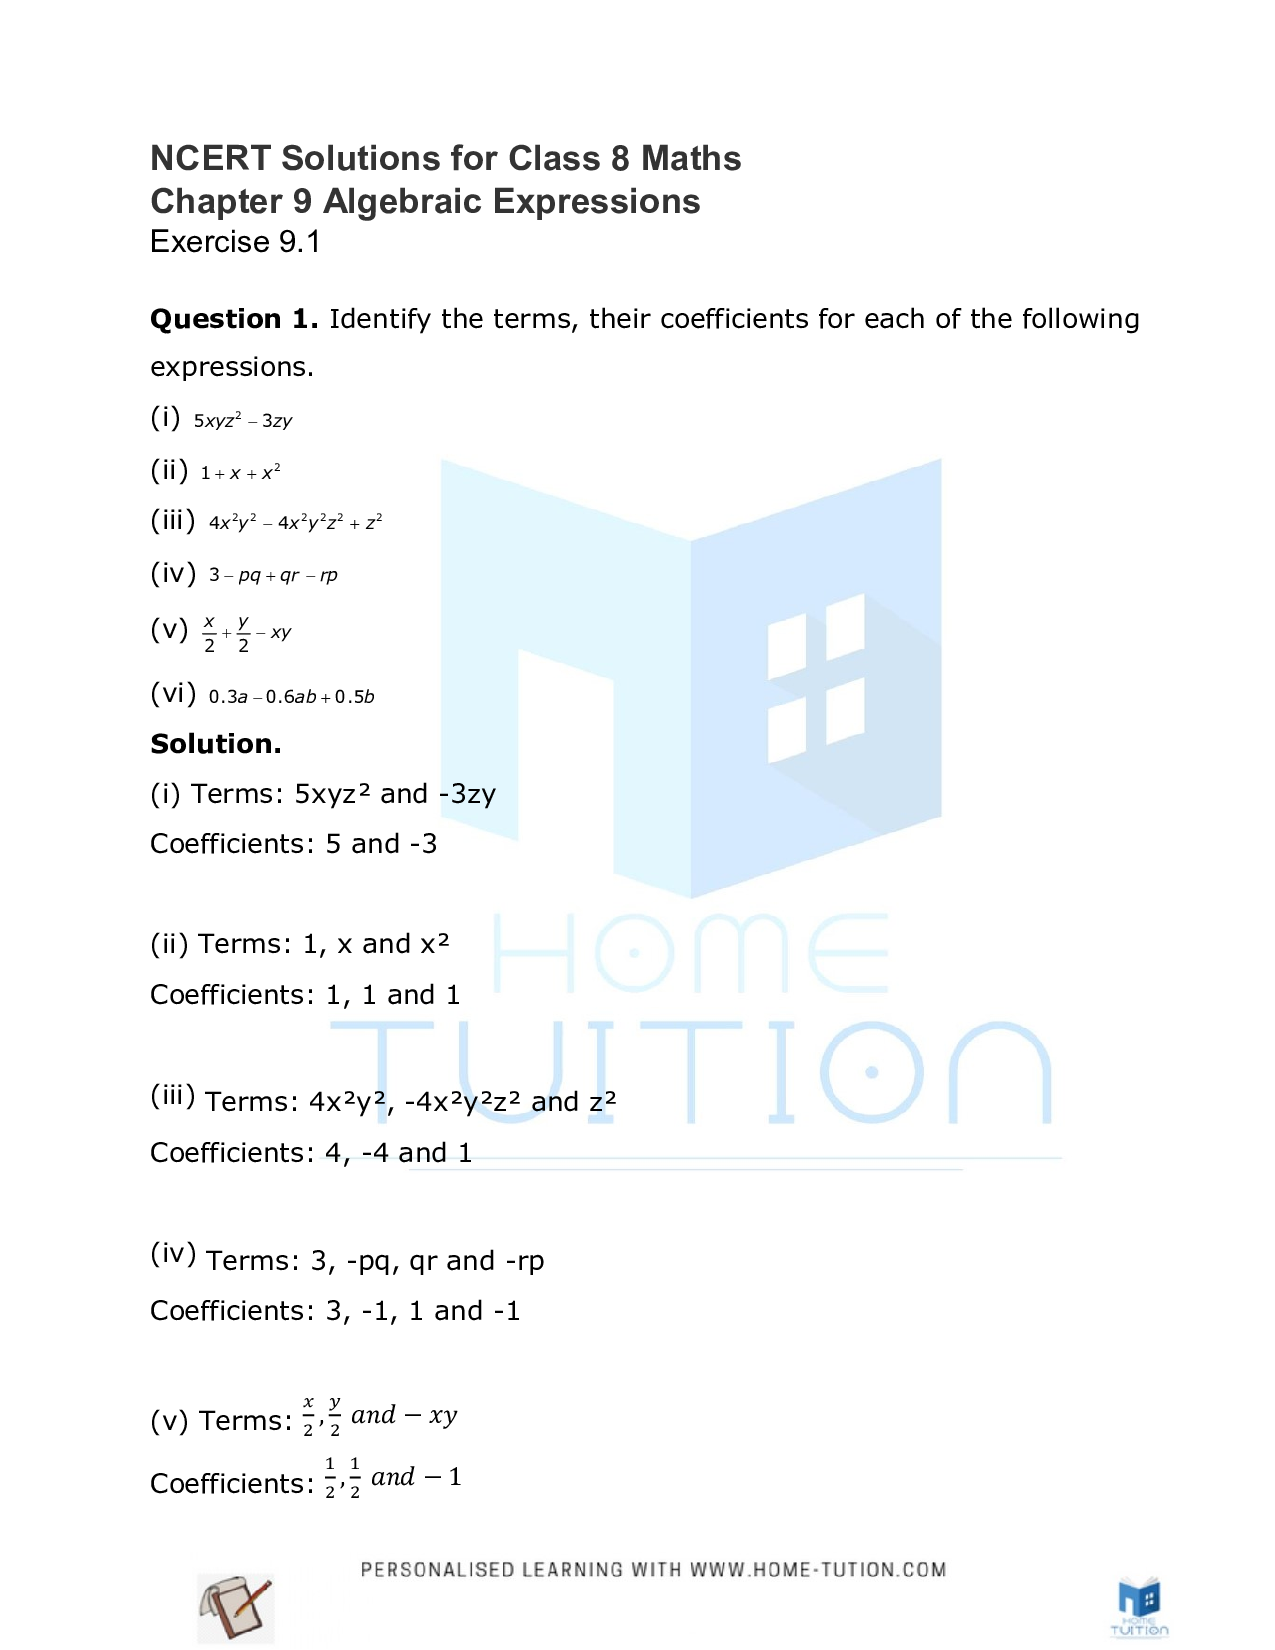 Class 8 Maths Chapter 9 Algebraic Expressions and Identities